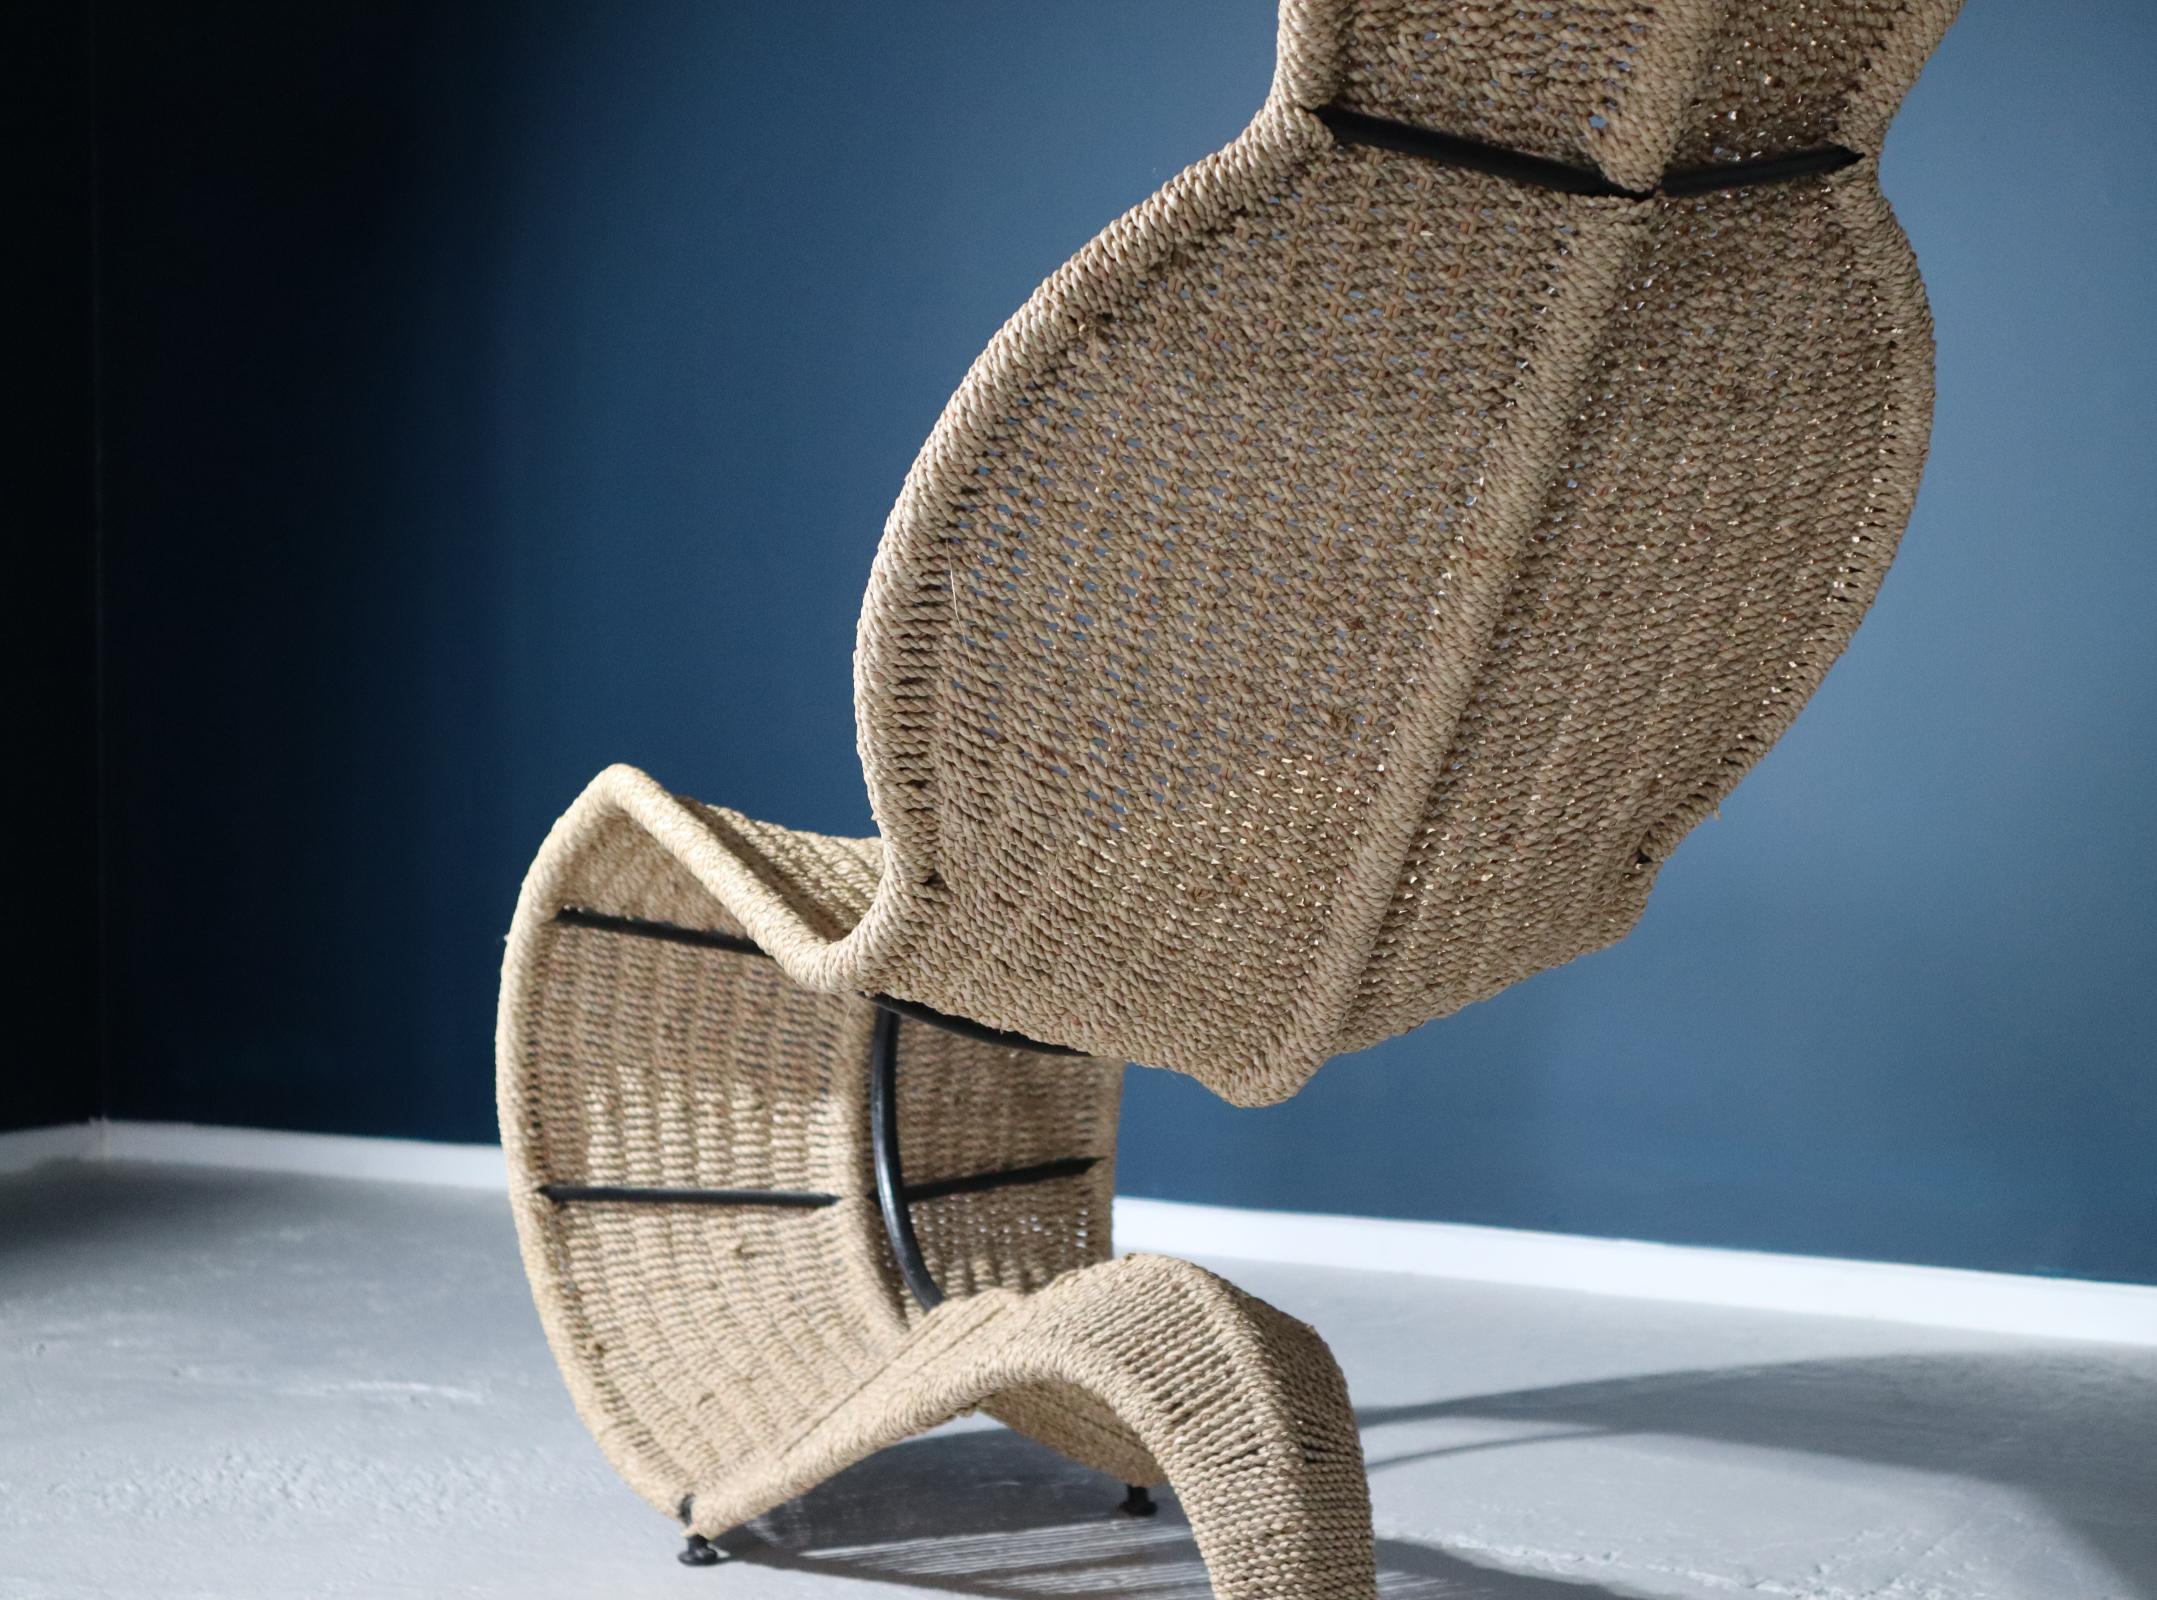 Late 20th Century Sculpture Tom Dixon 'Bolide' Woven Seagrass Chair, London, 1991 For Sale